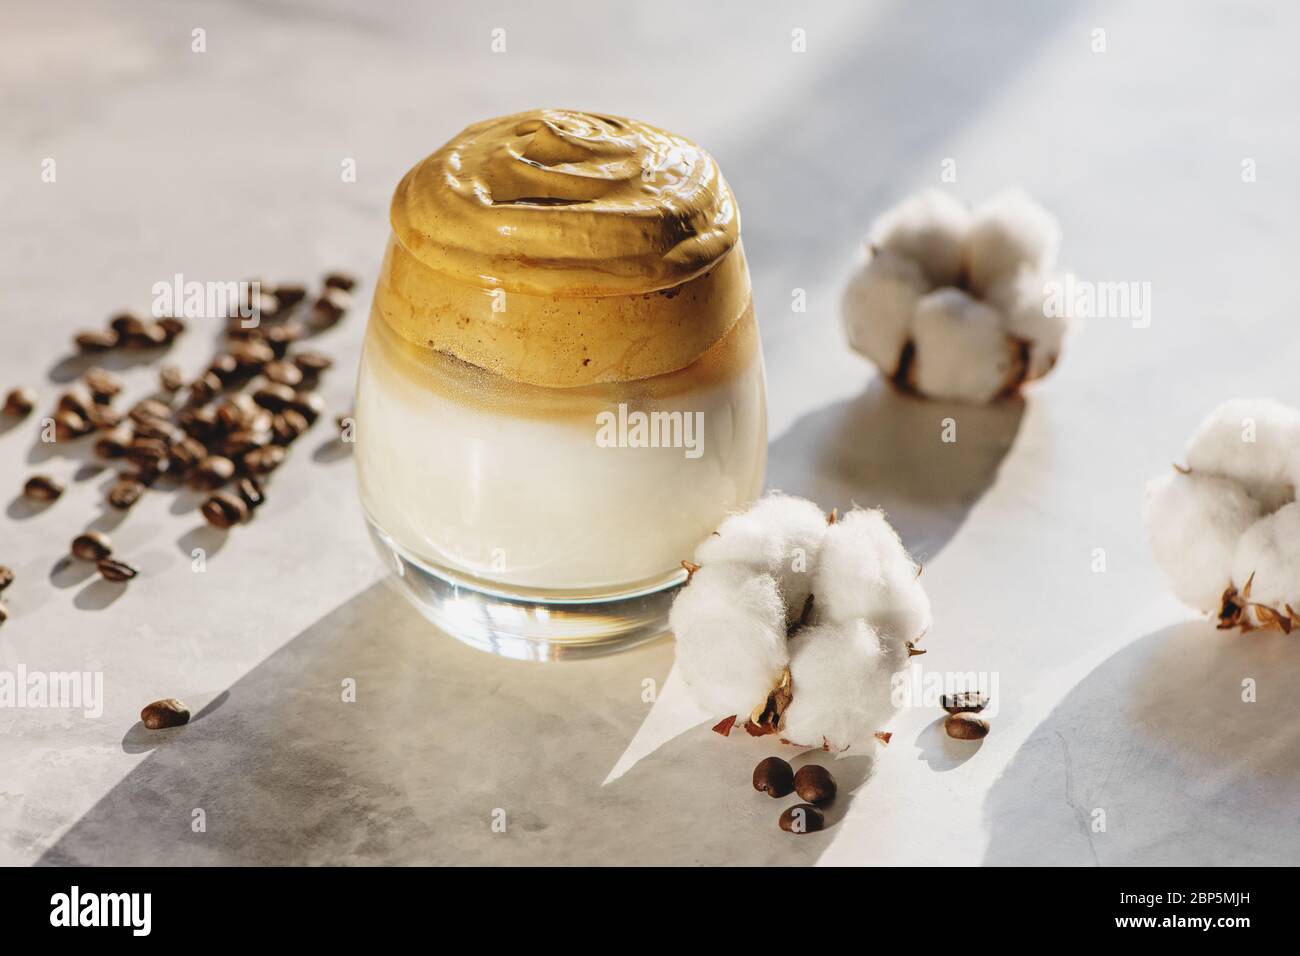 Dalgona coffee with cotton flowers on marble background close up. Stock Photo